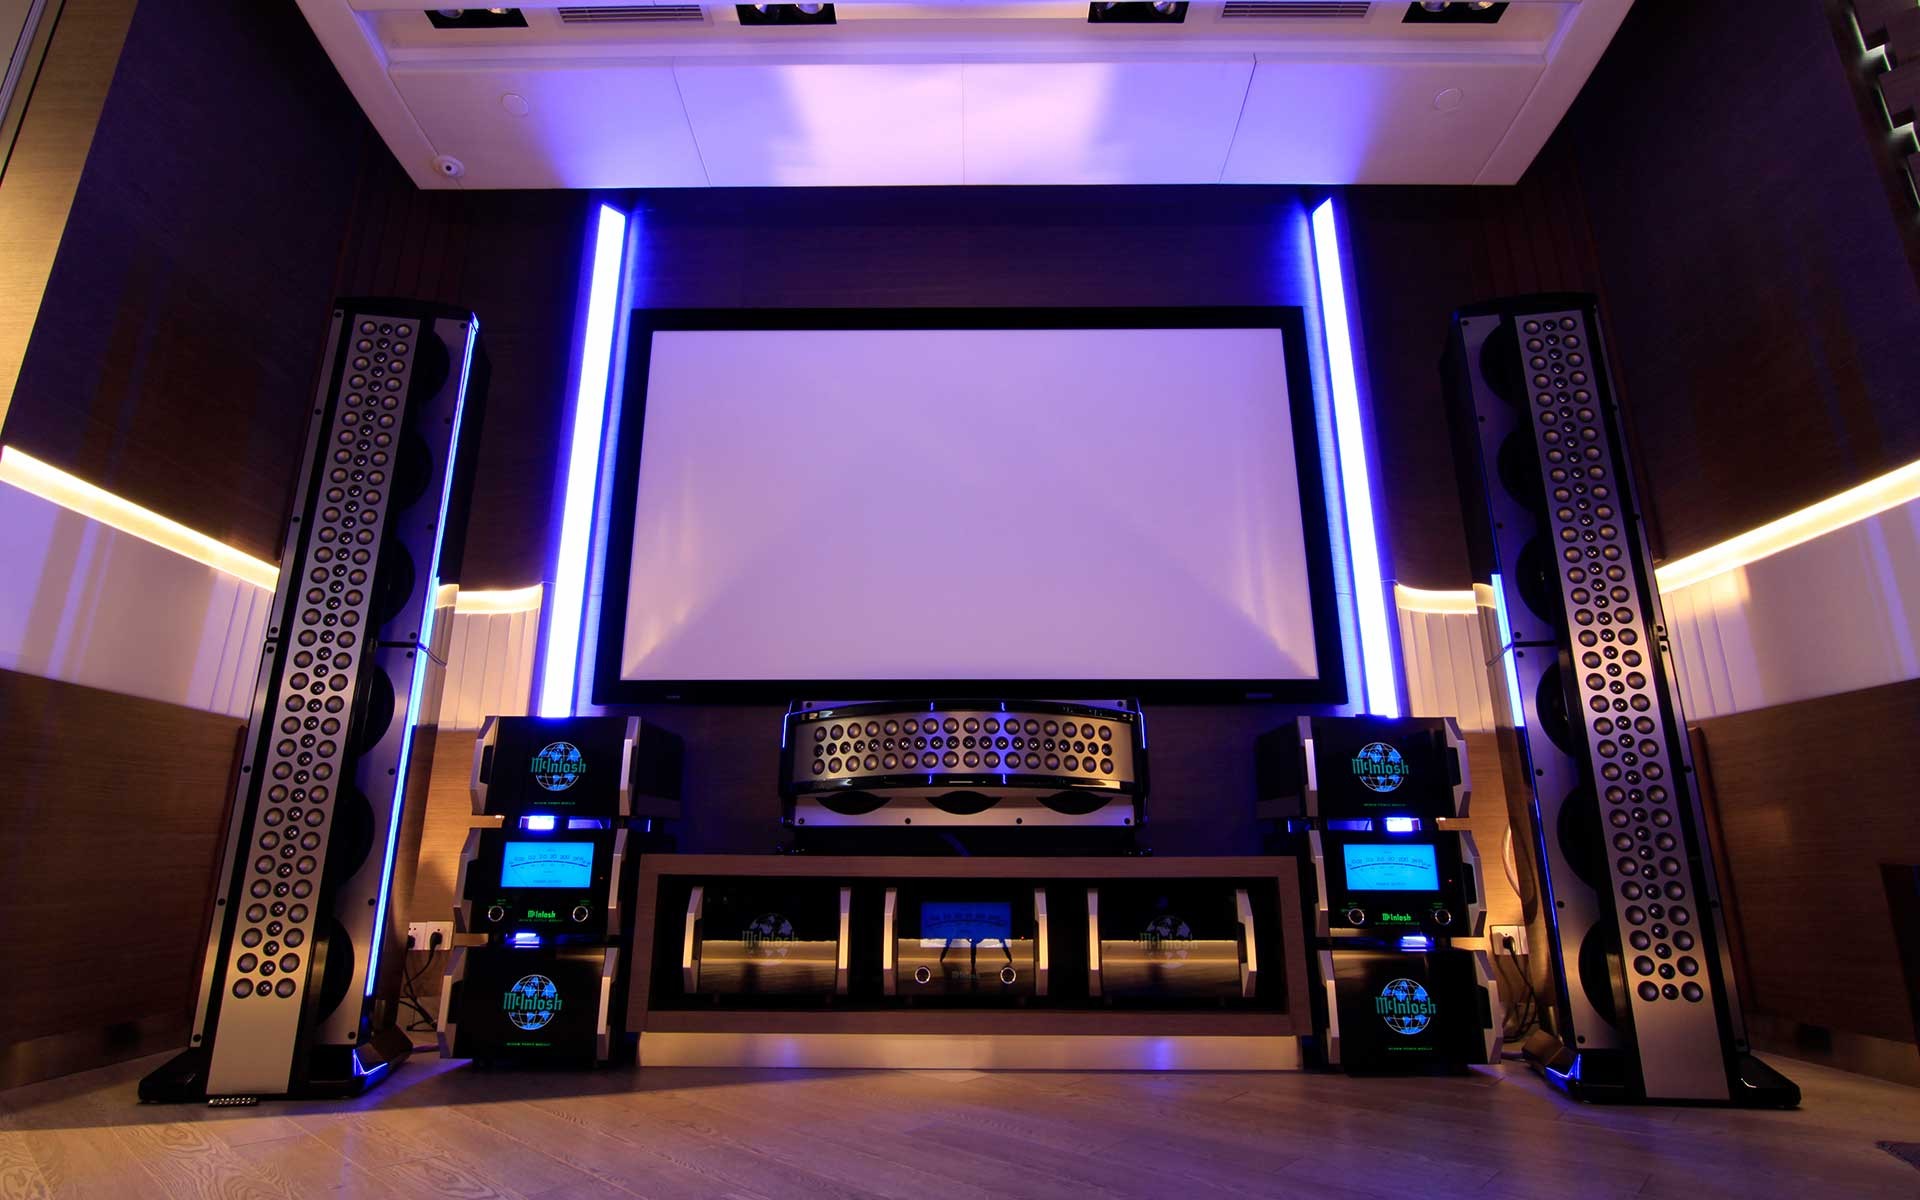 McIntosh Reference home theater system